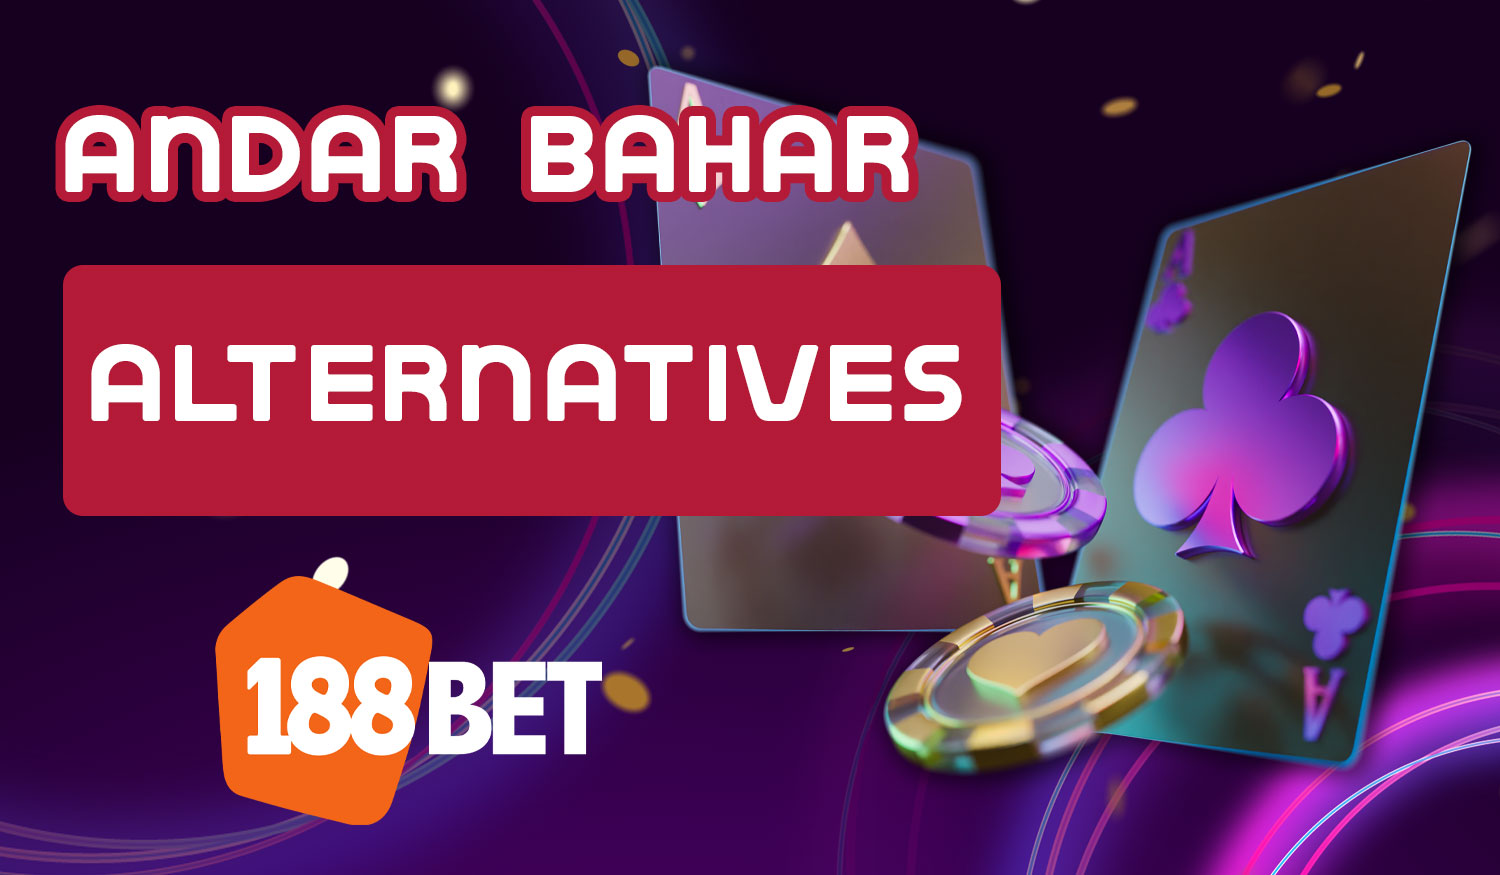 The bookmaker 188Bet offers several excellent alternatives to the game of Andar Bahar